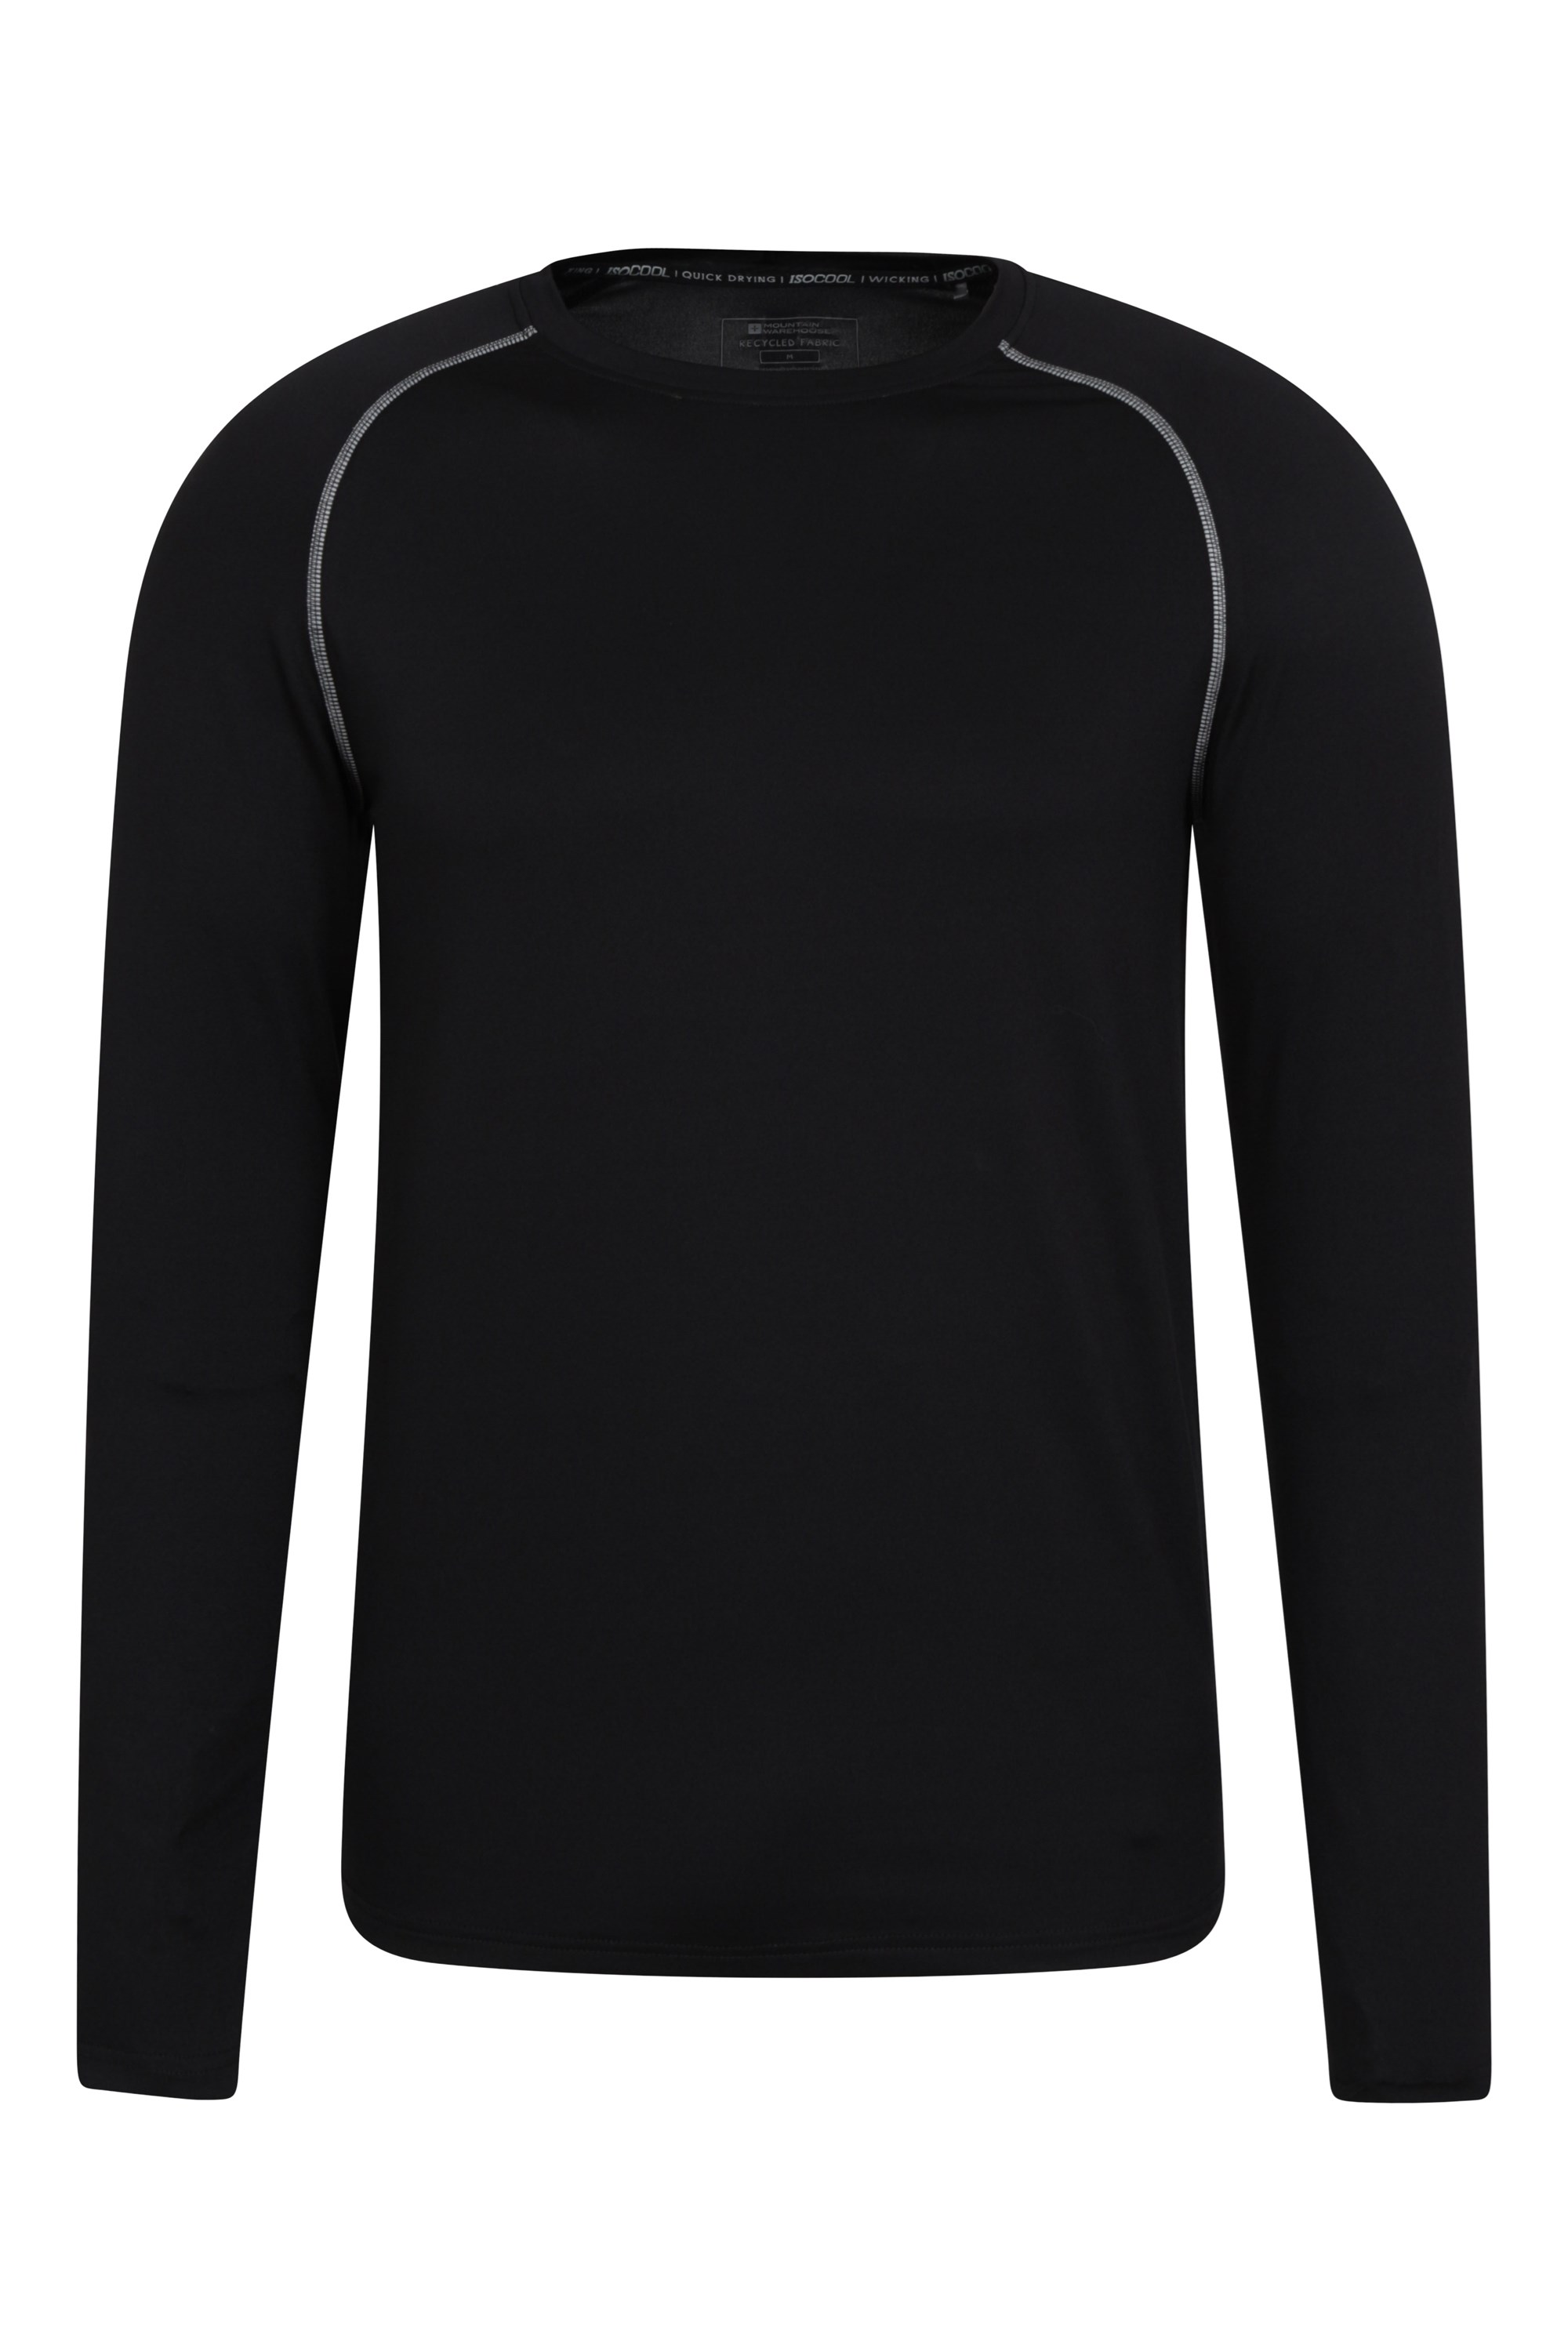 Energy Mens Recycled Active Top - Black